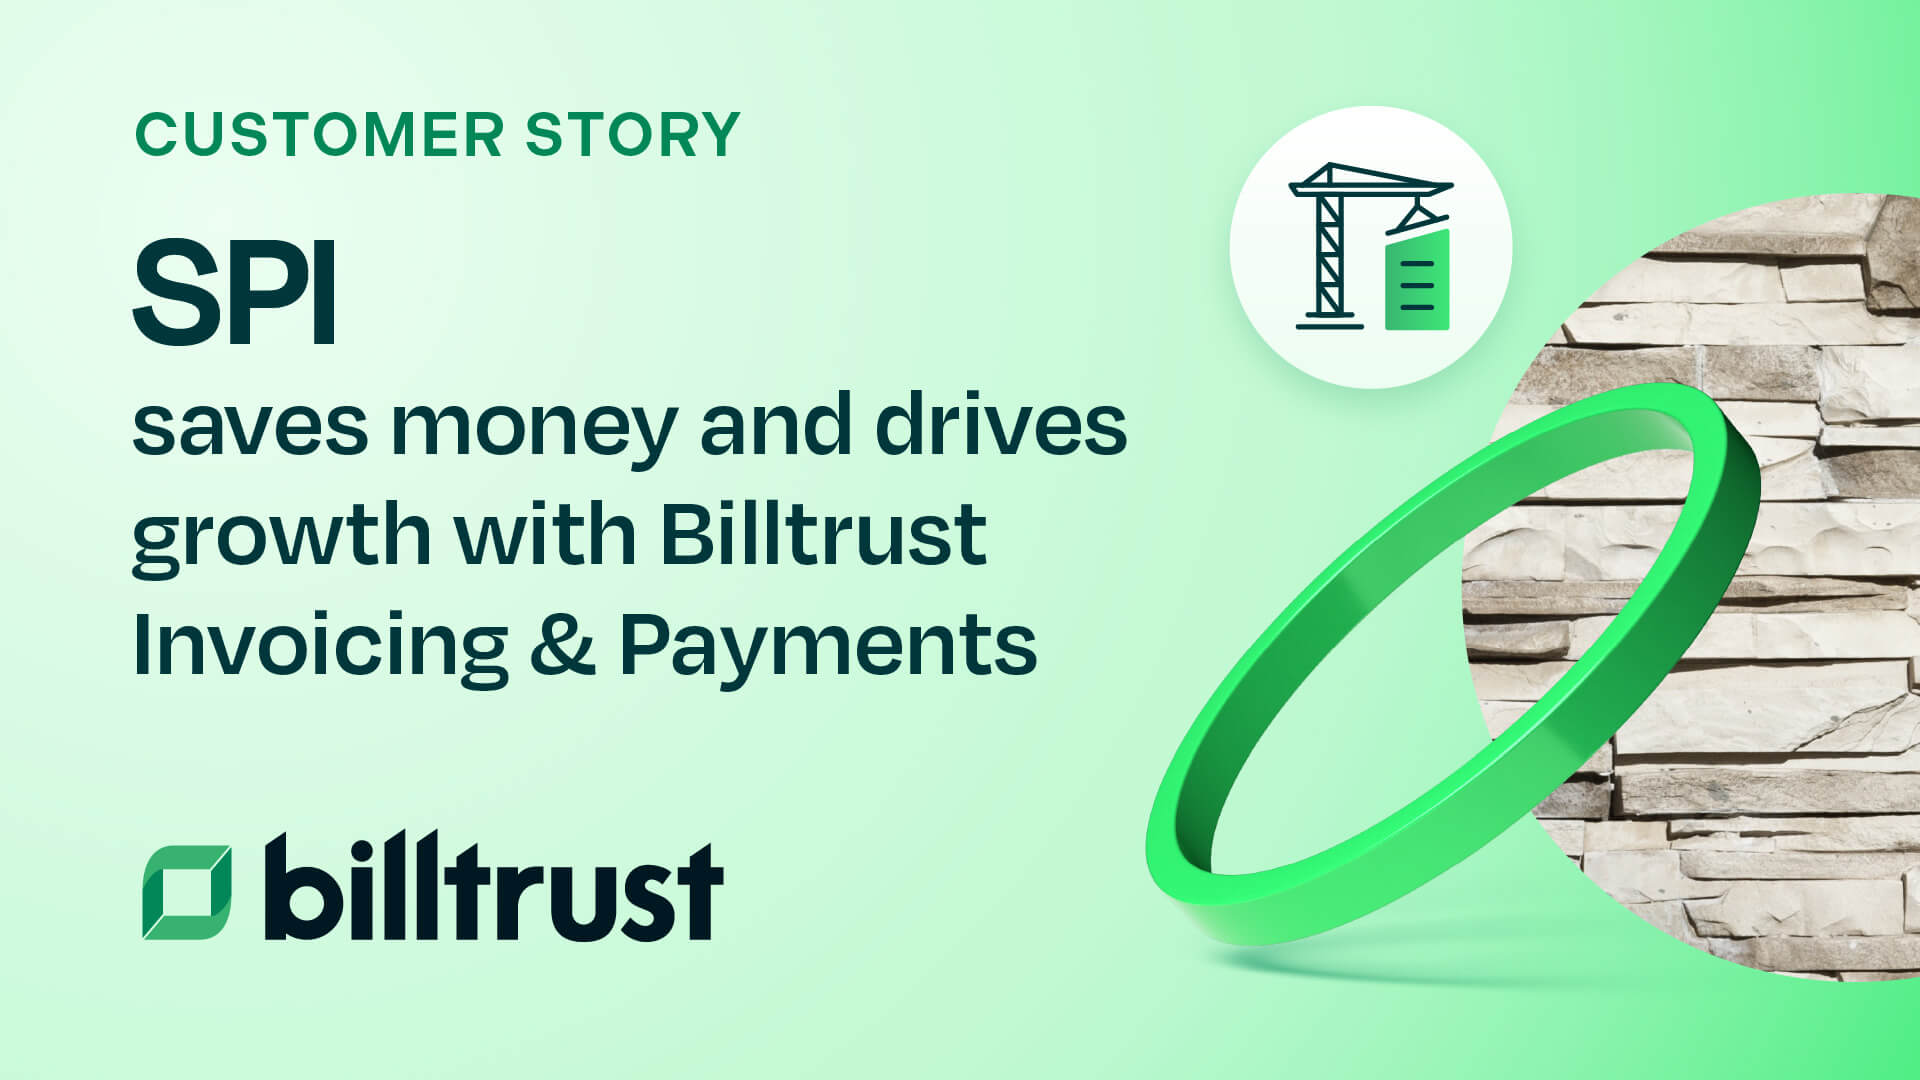 SPI saves money and drives growth with Billtrust Invoicing and Payments video thumbnail